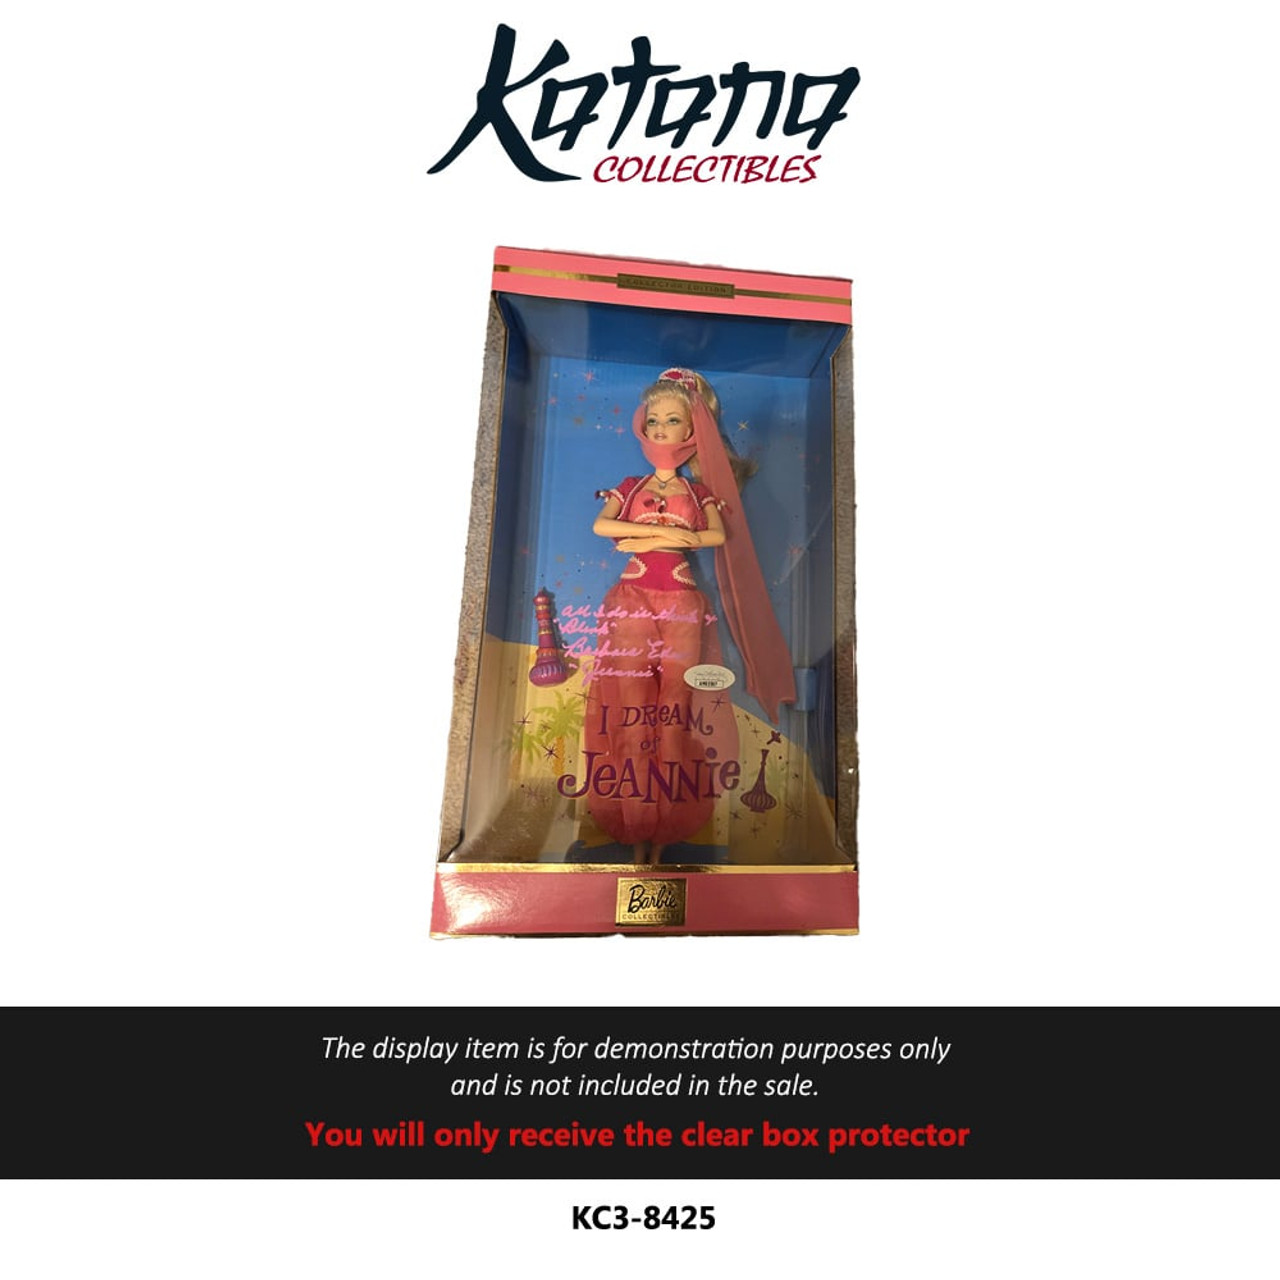 Katana Collectibles Protector For I Dream of Jeannie Barbara Eden Barbie Doll 2000 Mattel #22913